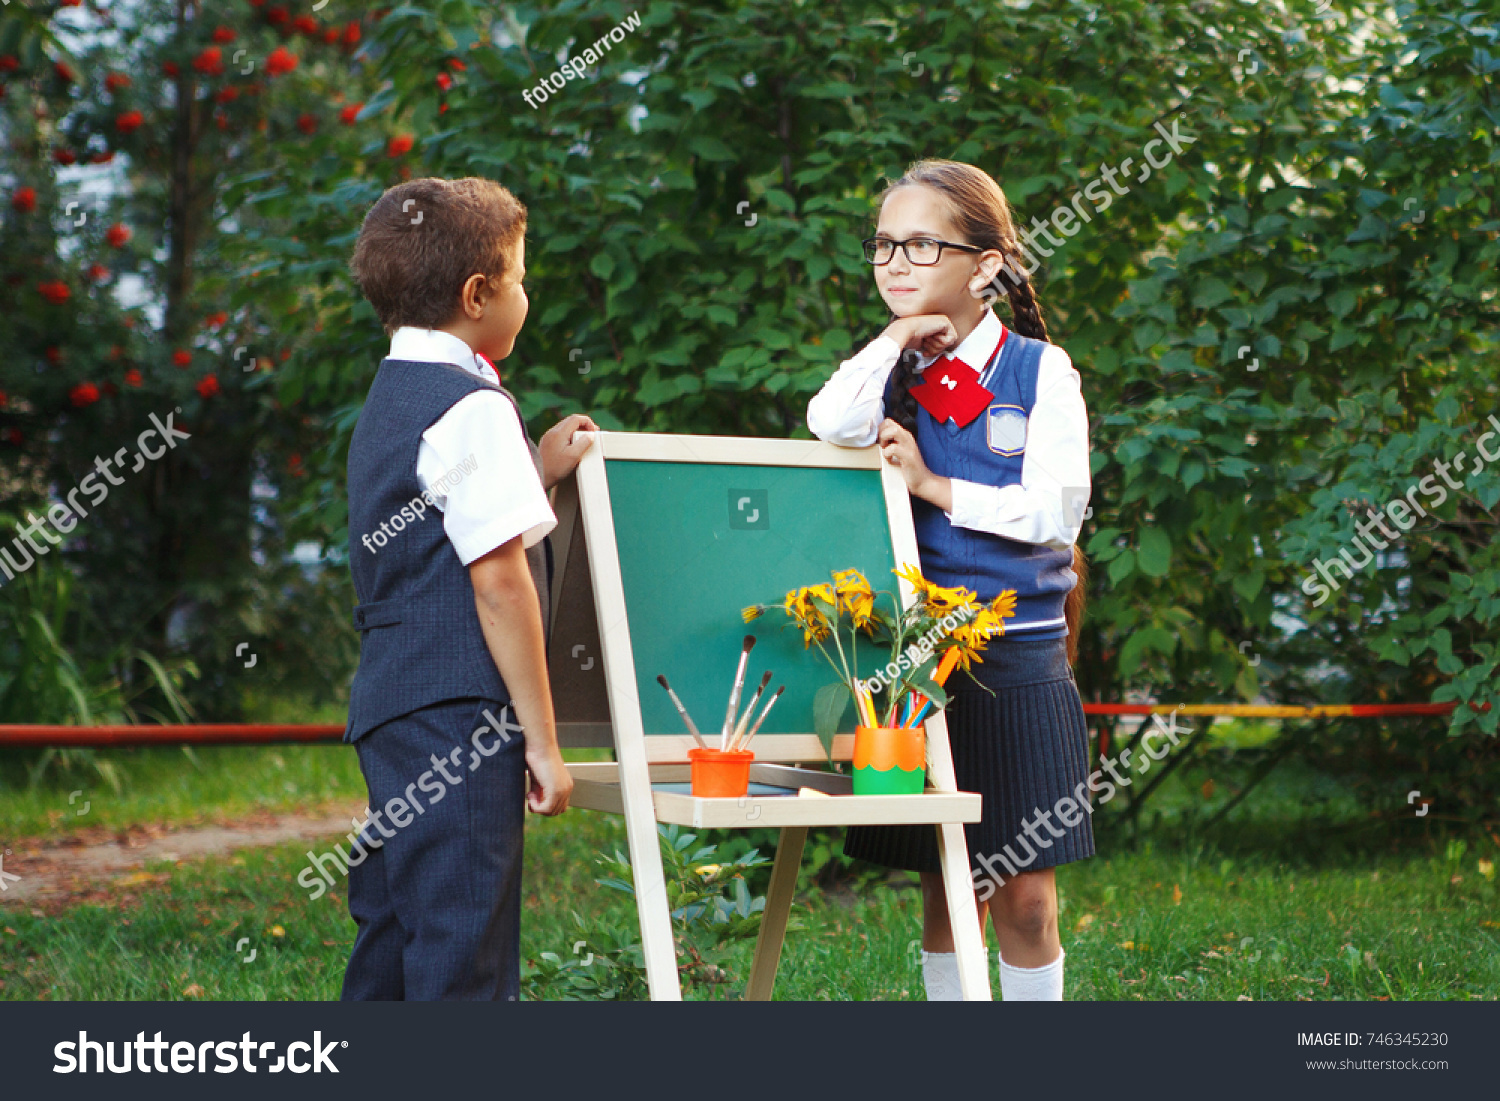 Small pupils a boy and a girl at the blackboard have fun laughing in the Park. copyspace #746345230